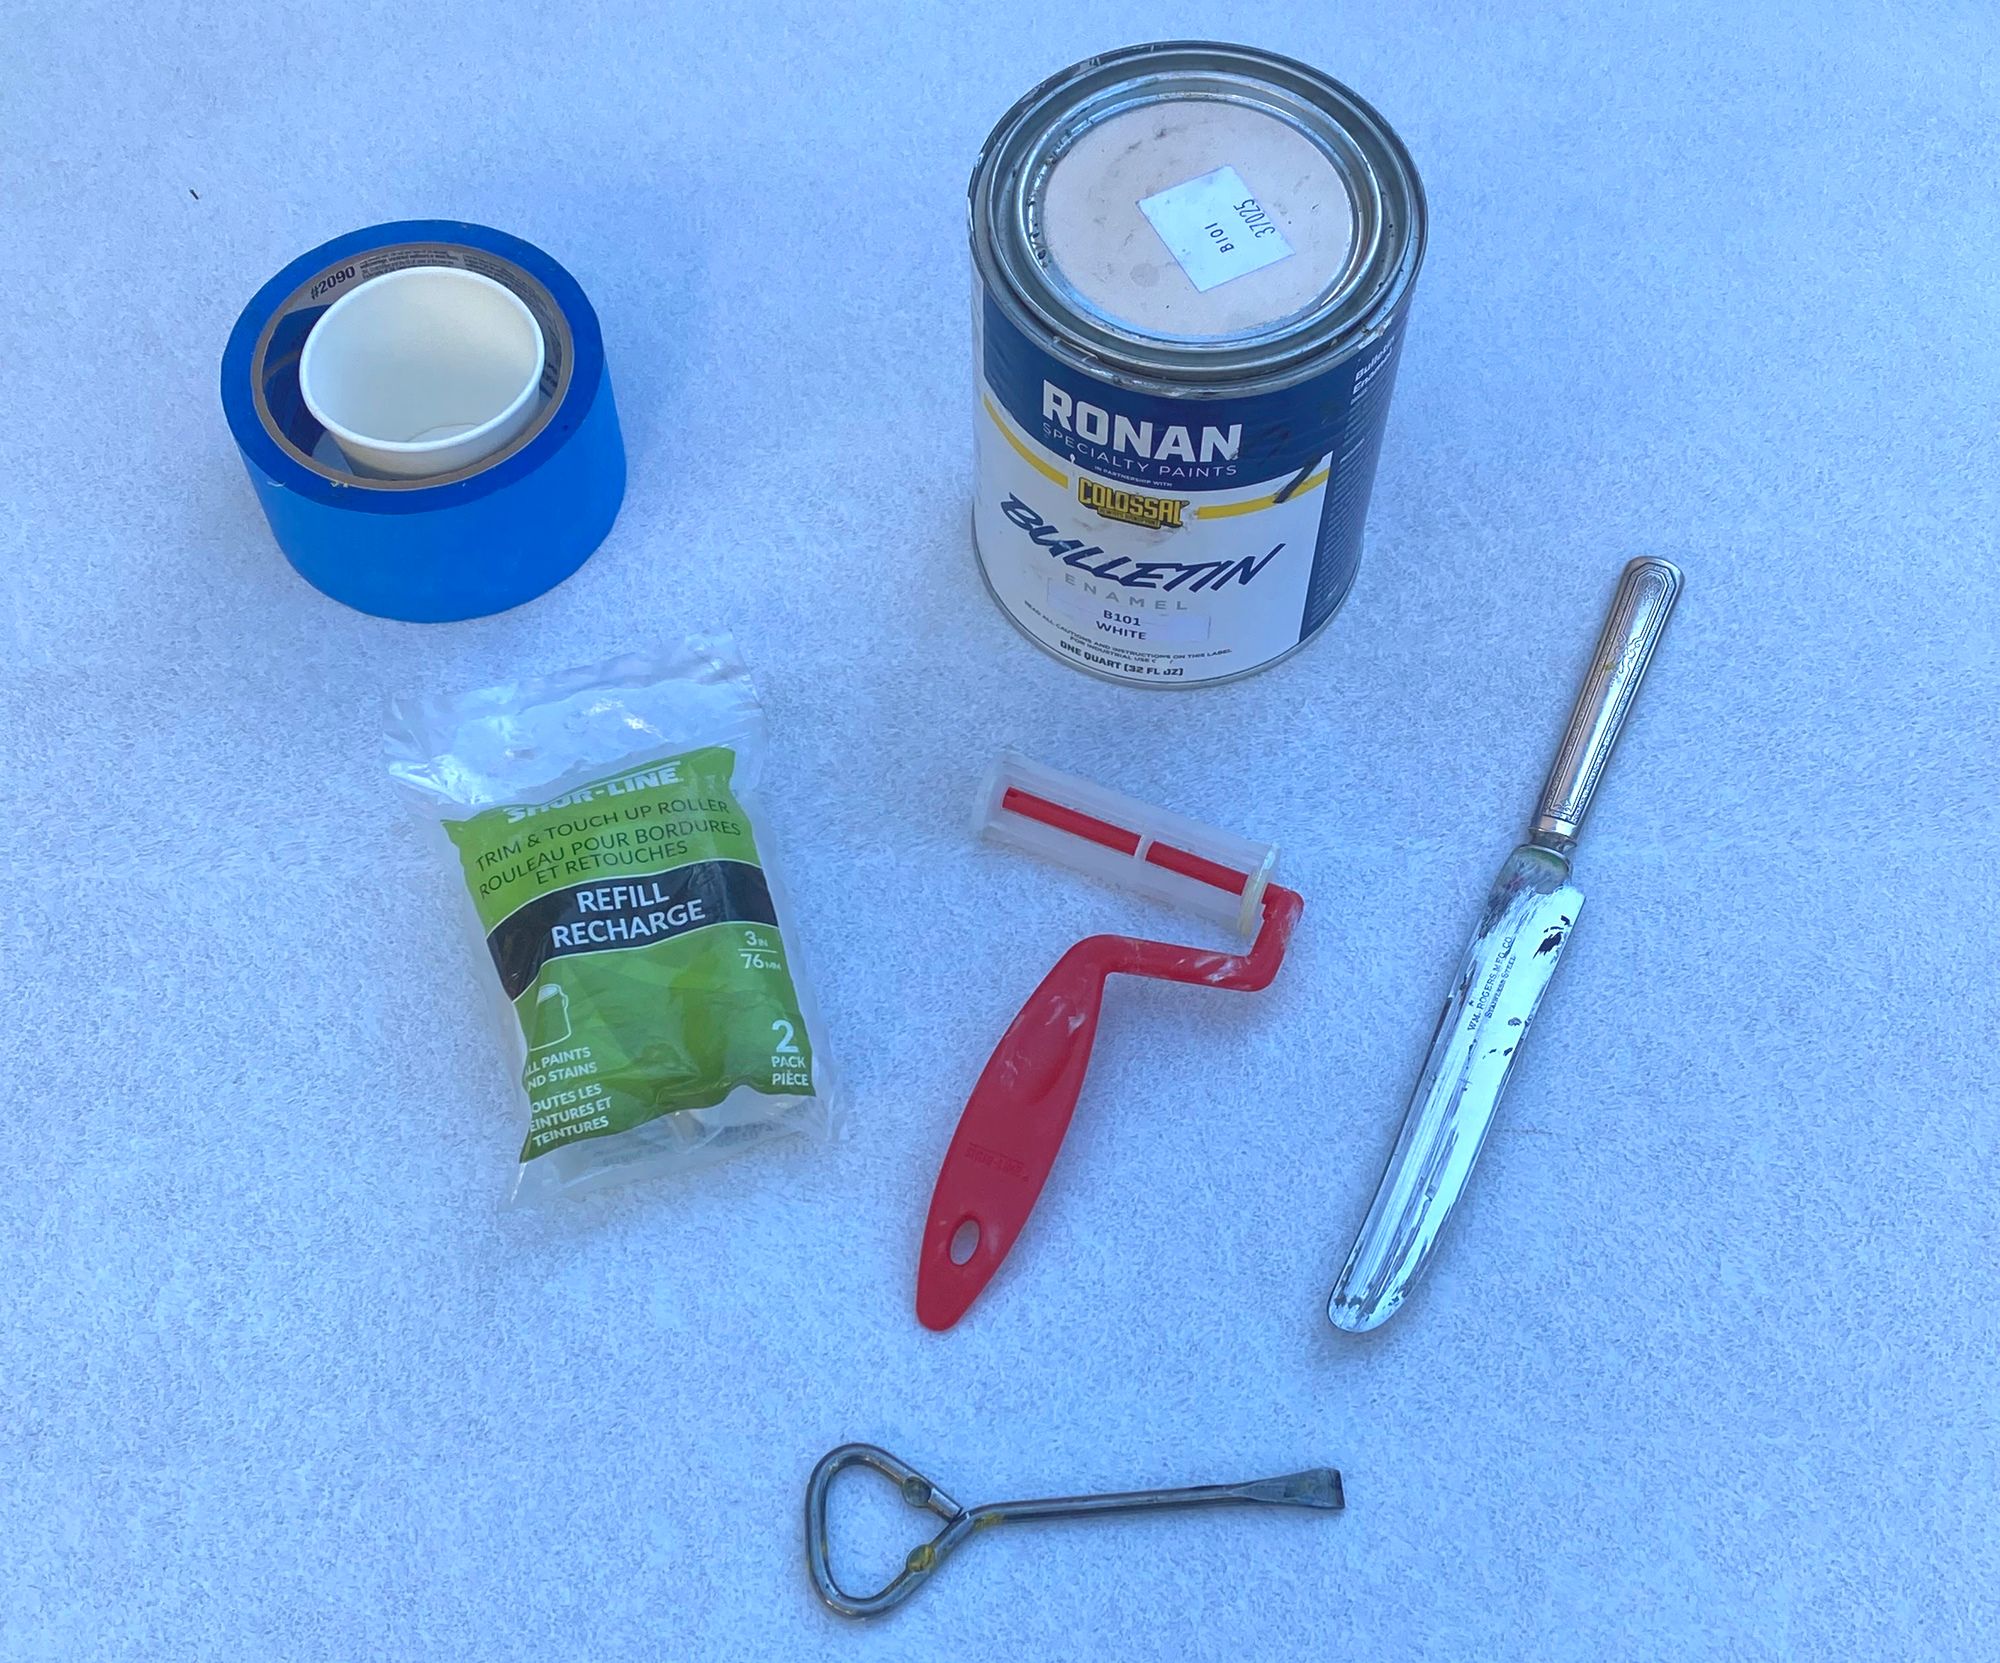 Painting materials on a surface.